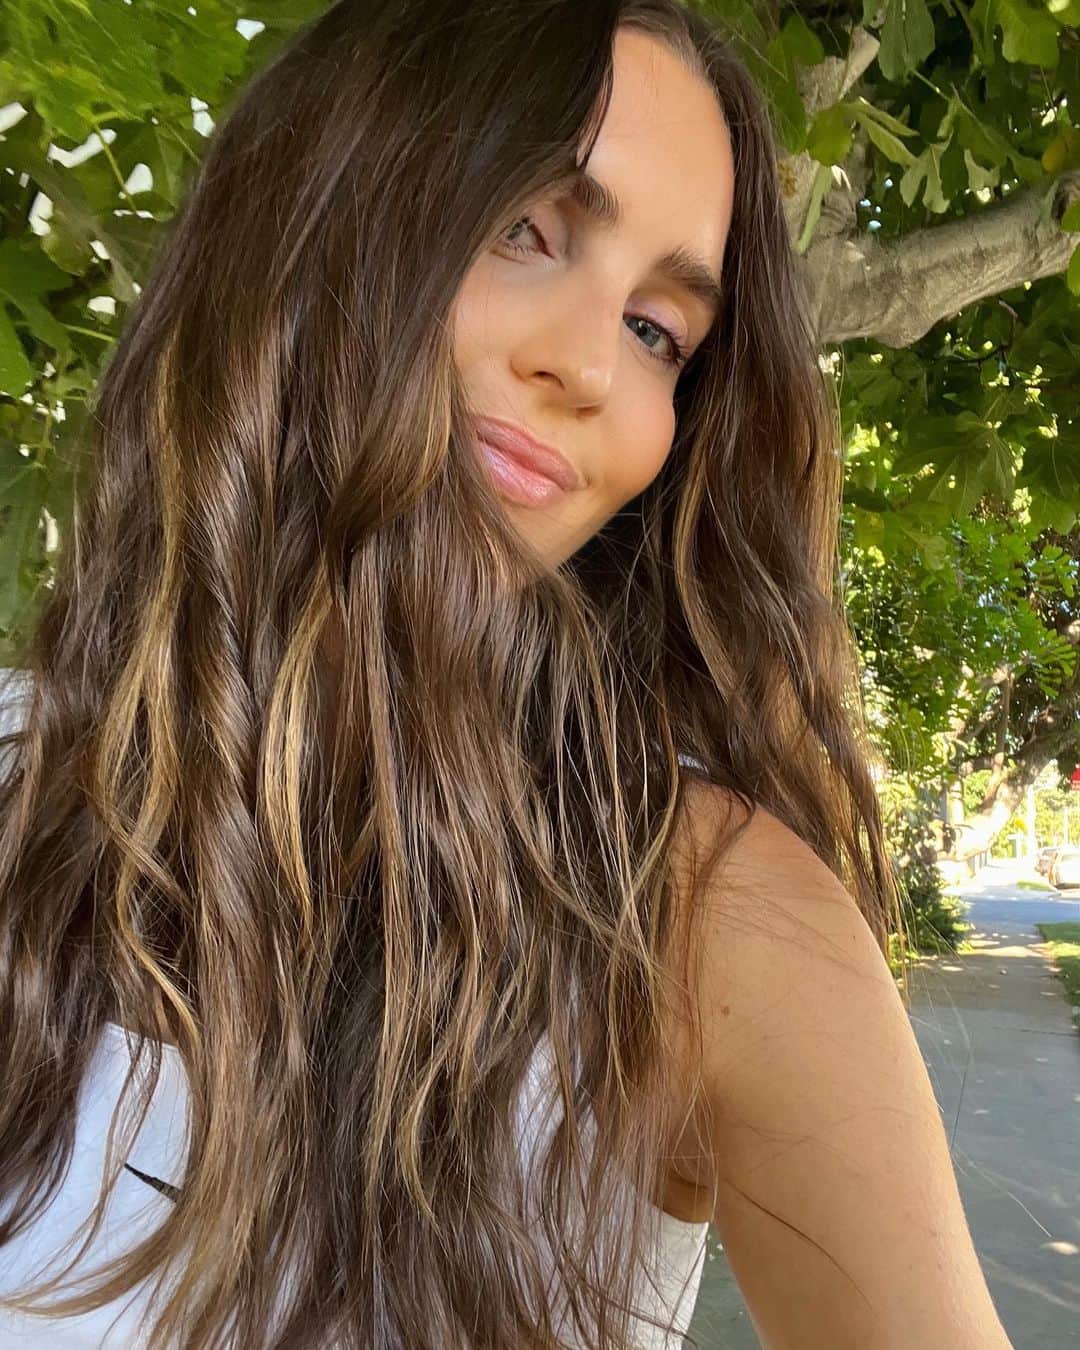 Kirsty Godsoのインスタグラム：「The highlight of summer? Me! 🥰 hair still thriving thanks to @garnierusa #GarnierPartner I used the Garnier Olia Highlights kit in shade HO3 for the perfect summer lift to my hair. Powered by oils and kaolin clay, leaving your hair nourished and shiny with no ammonia or silicones. The best part? You can do it at home yourself and Garnier is approved by Cruelty Free International under the Leaping Bunny program! Try it @cvspharmacy ✨」